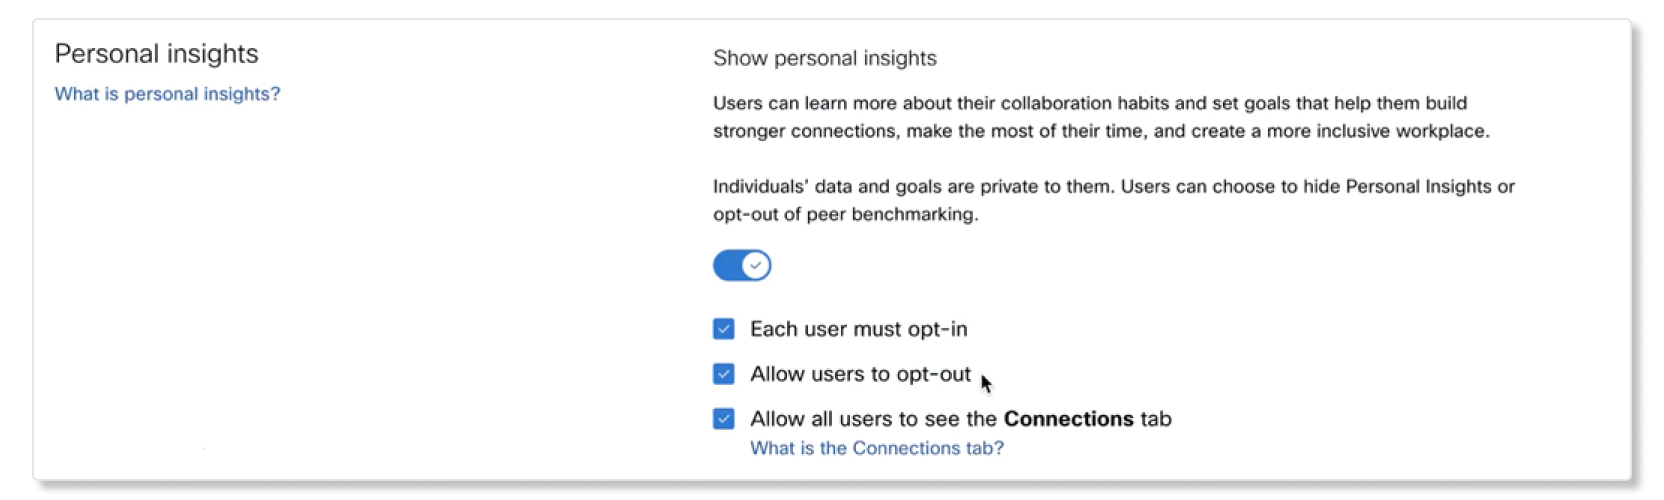 Personal insights controls in Control Hub